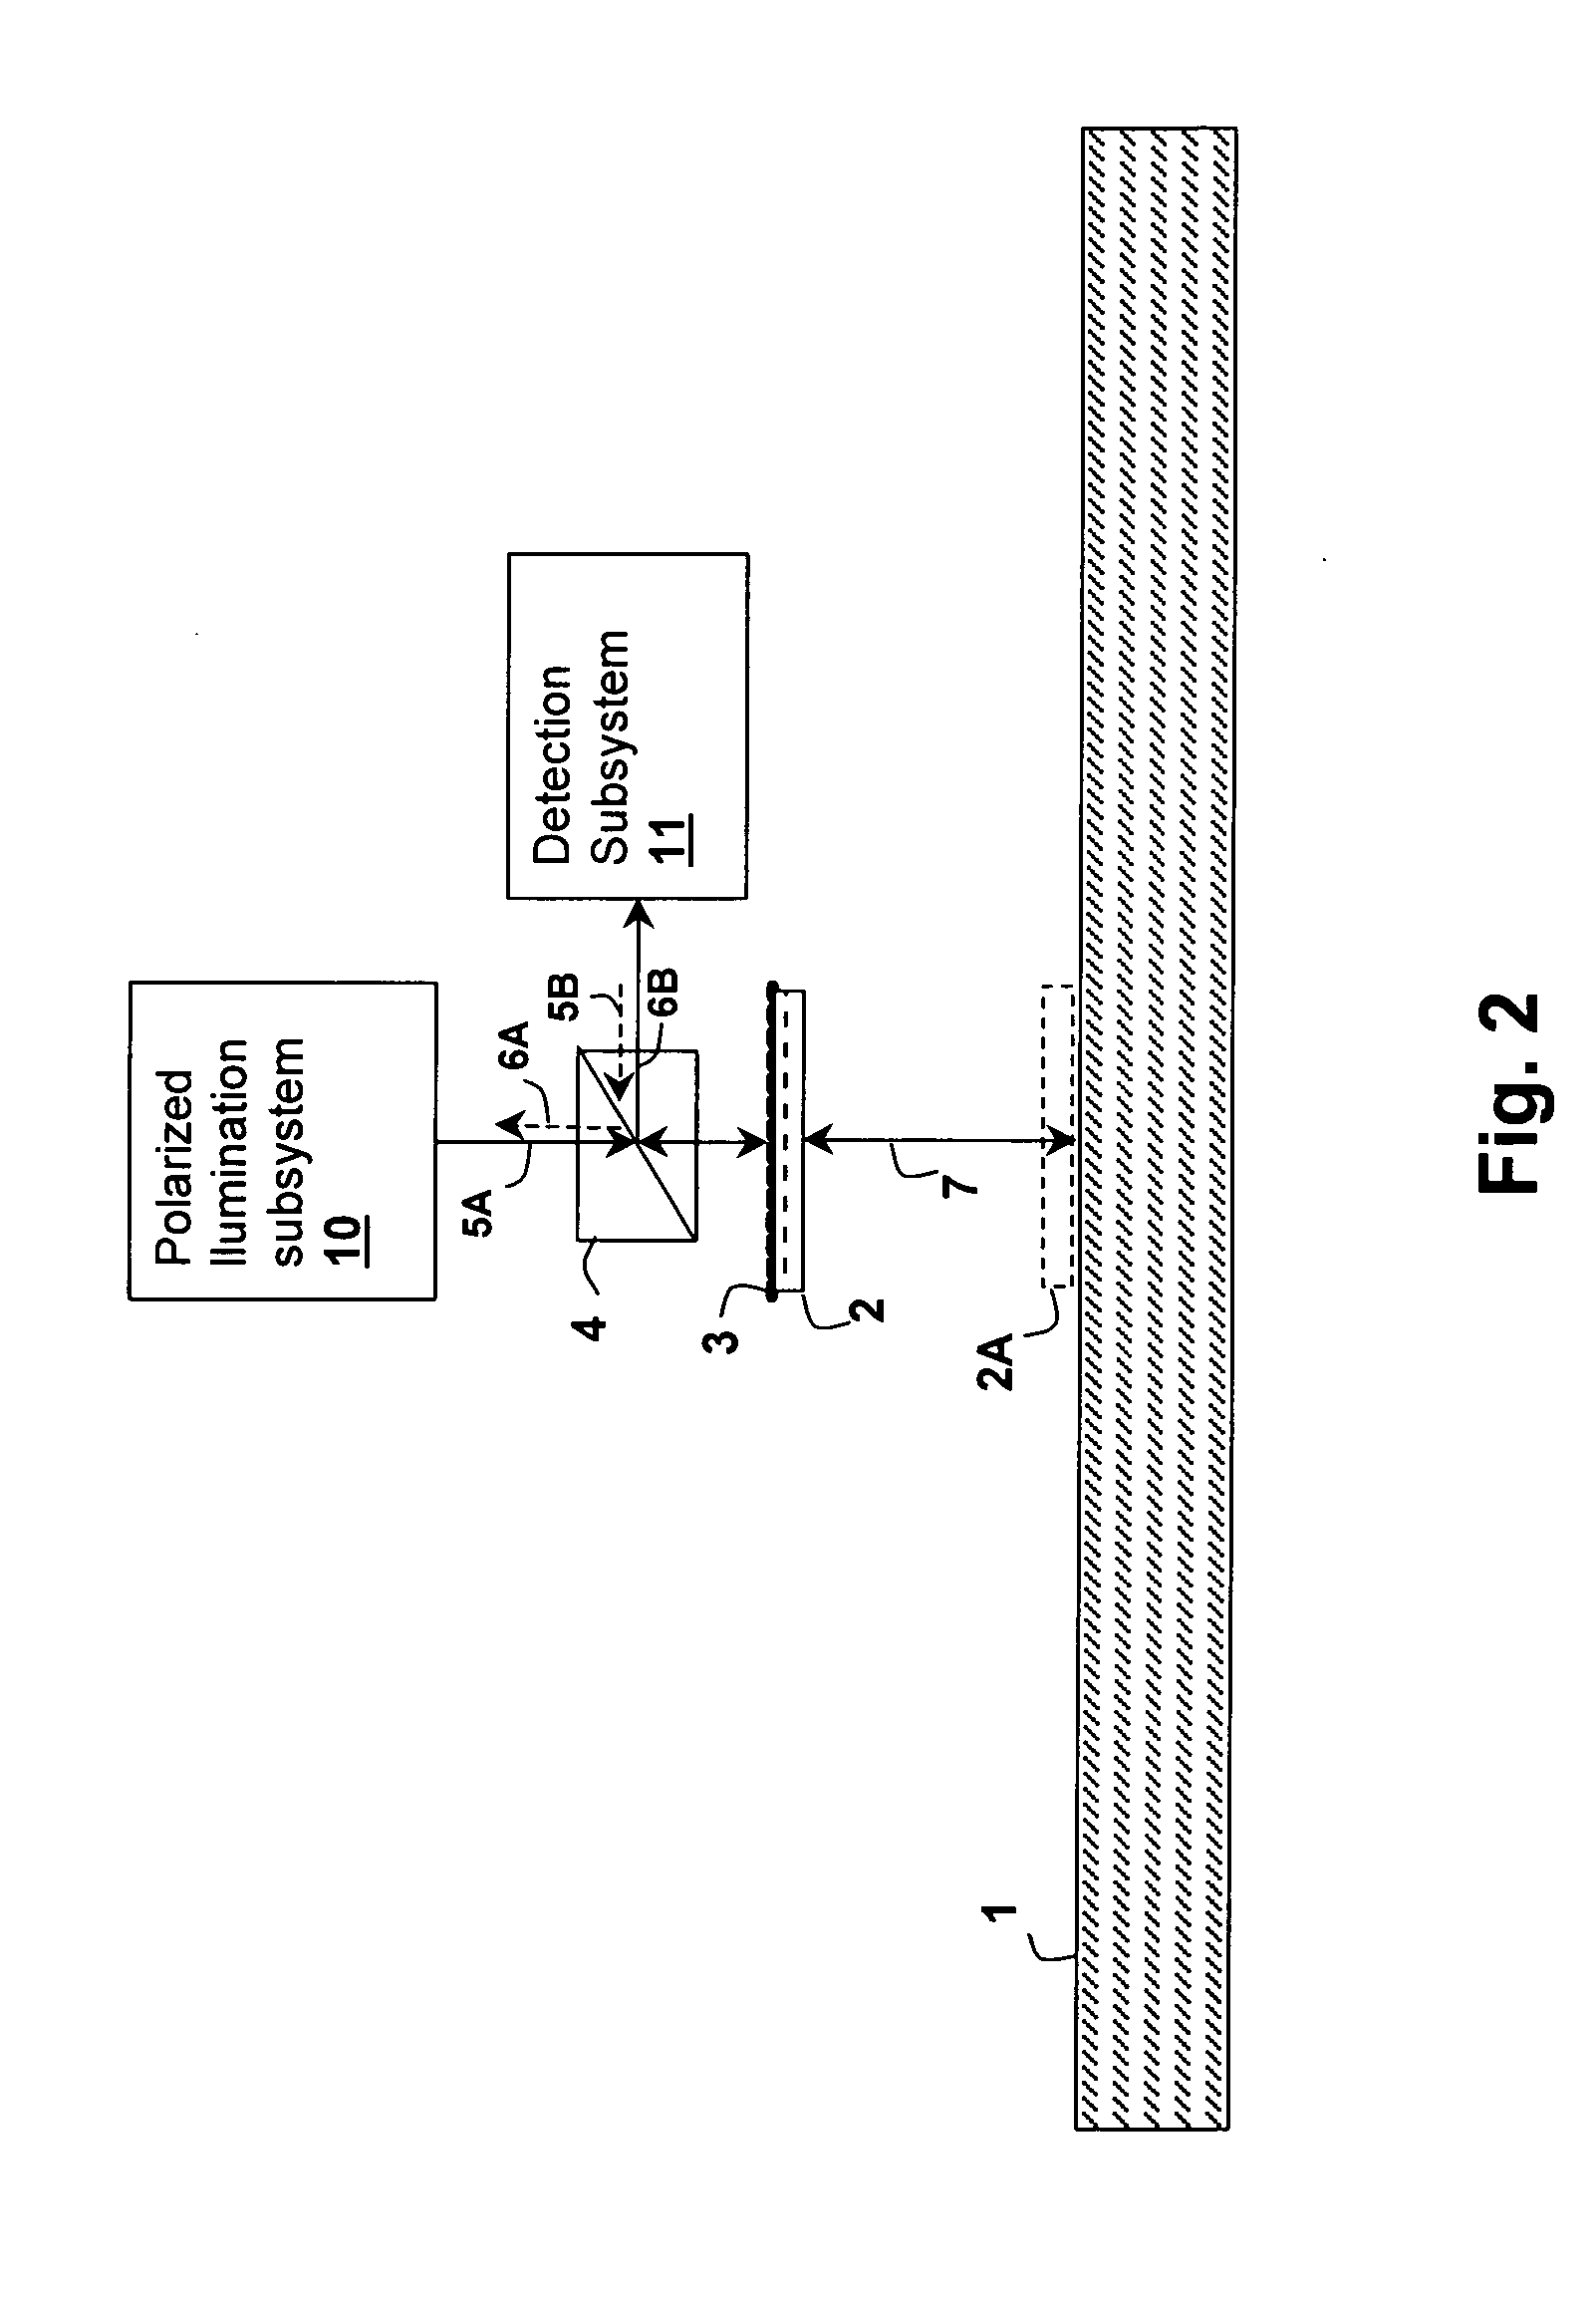 Fabry-perot resonator apparatus and method including an in-resonator polarizing element